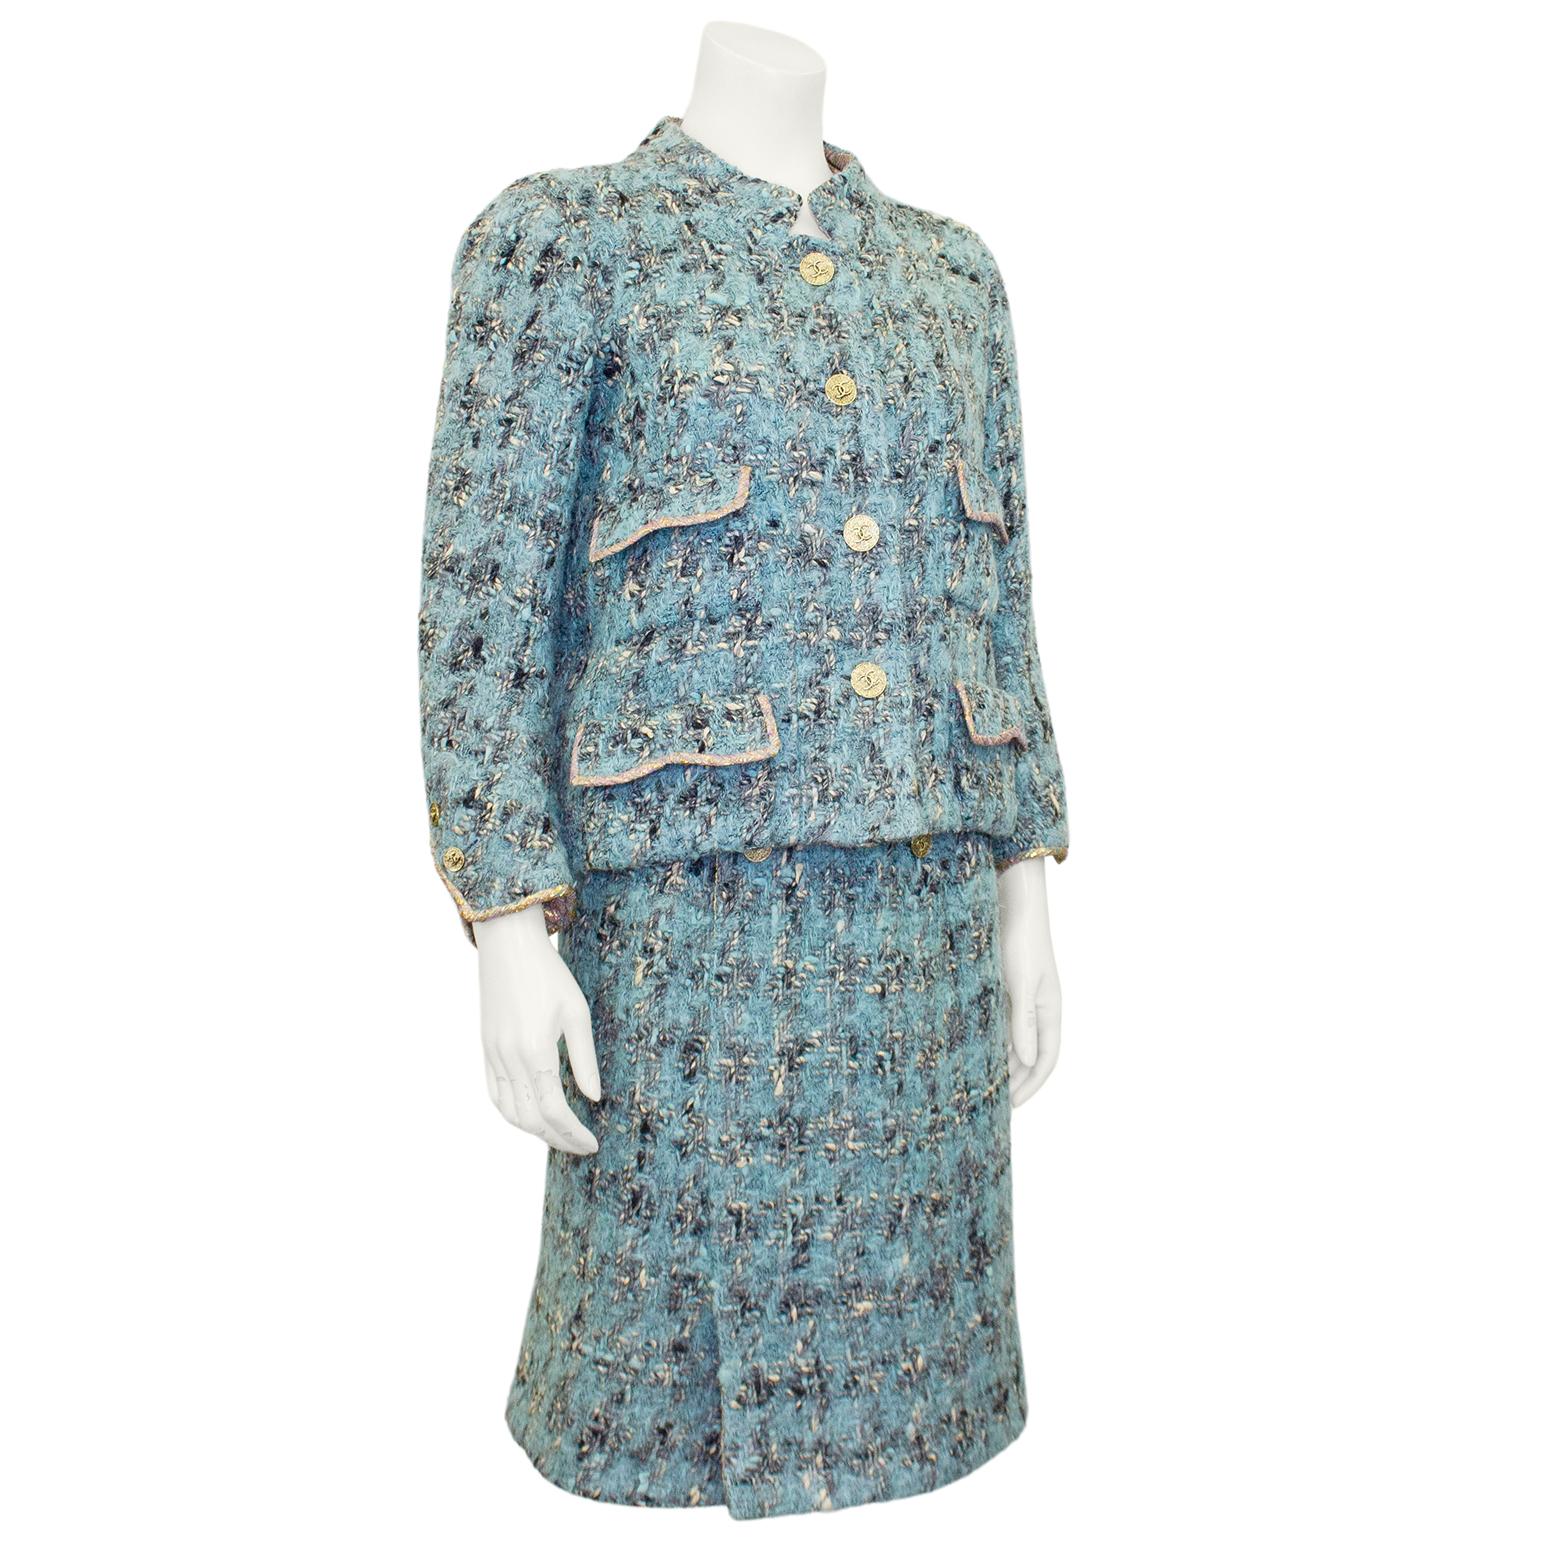 Chanel Haute Couture tweed and silk and lurex dress and jacket ensemble from the 1960s. The ensemble combines blue, black and cream tweed with a pink, blue and metallic silk and lurex lining. The jacket features a Mandarin collar, large gold tone